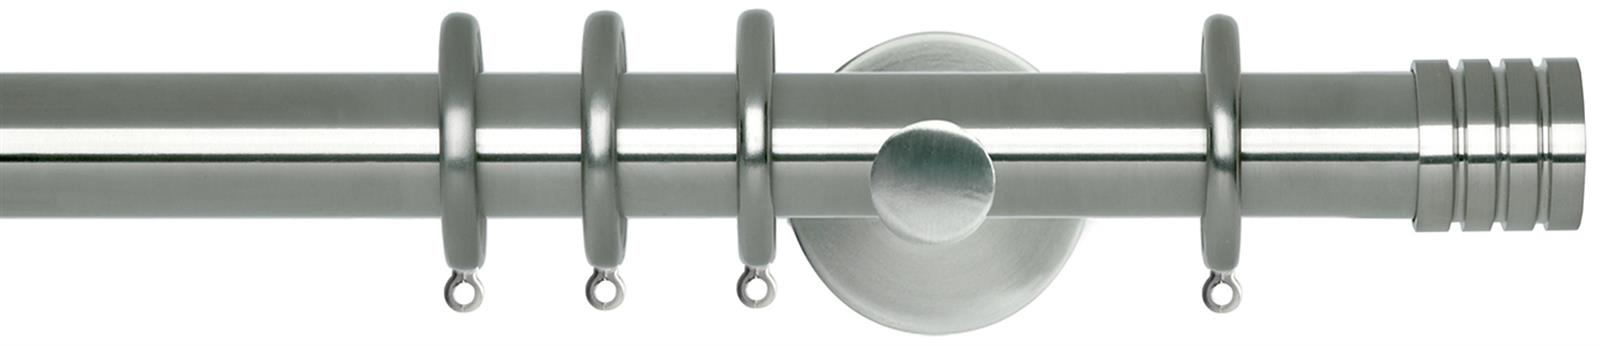 Rolls Neo 28mm by Hallis Hudson Metal Curtain Pole in a Stainless Steel effect finish with Stud finials and contemporary cylinder style brackets